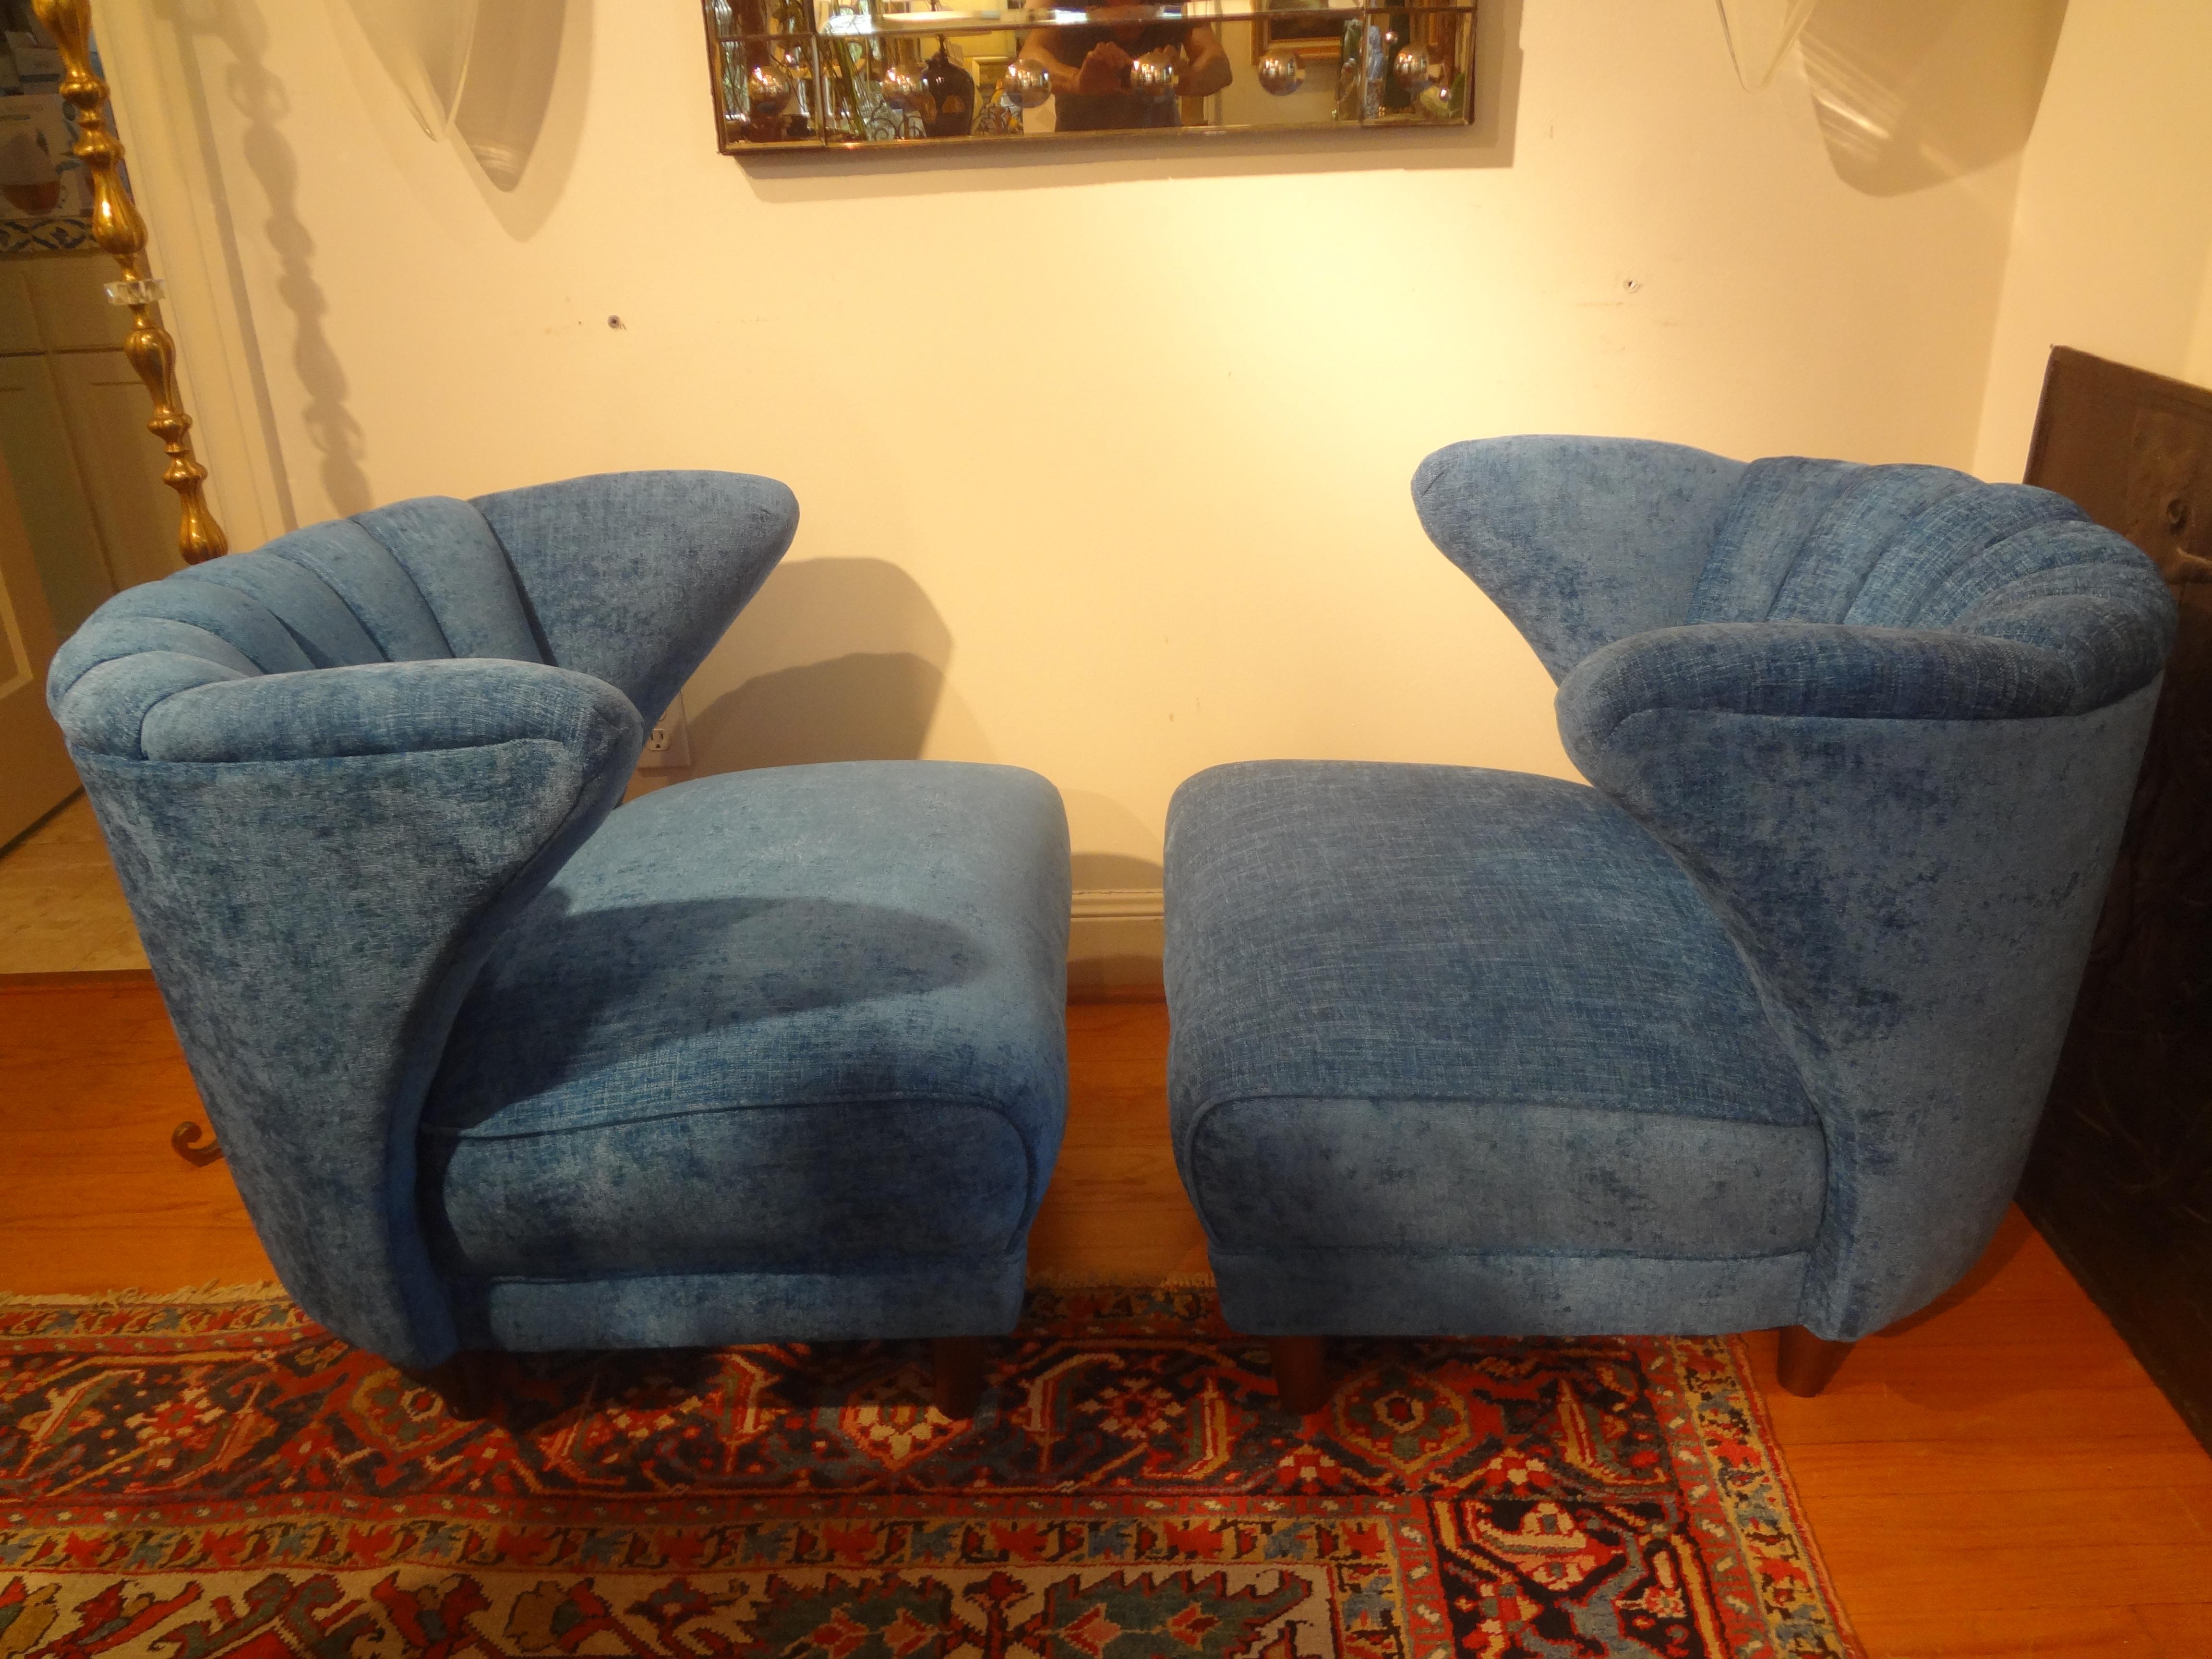 Pair Of Mid Century Modern Lounge Chairs By Karpen Of California.
This sculptural pair of mid-century modern lounge chairs are upholstered in a beautiful shade of blue chenille.
This gorgeous design lends itself for these to be floating in a